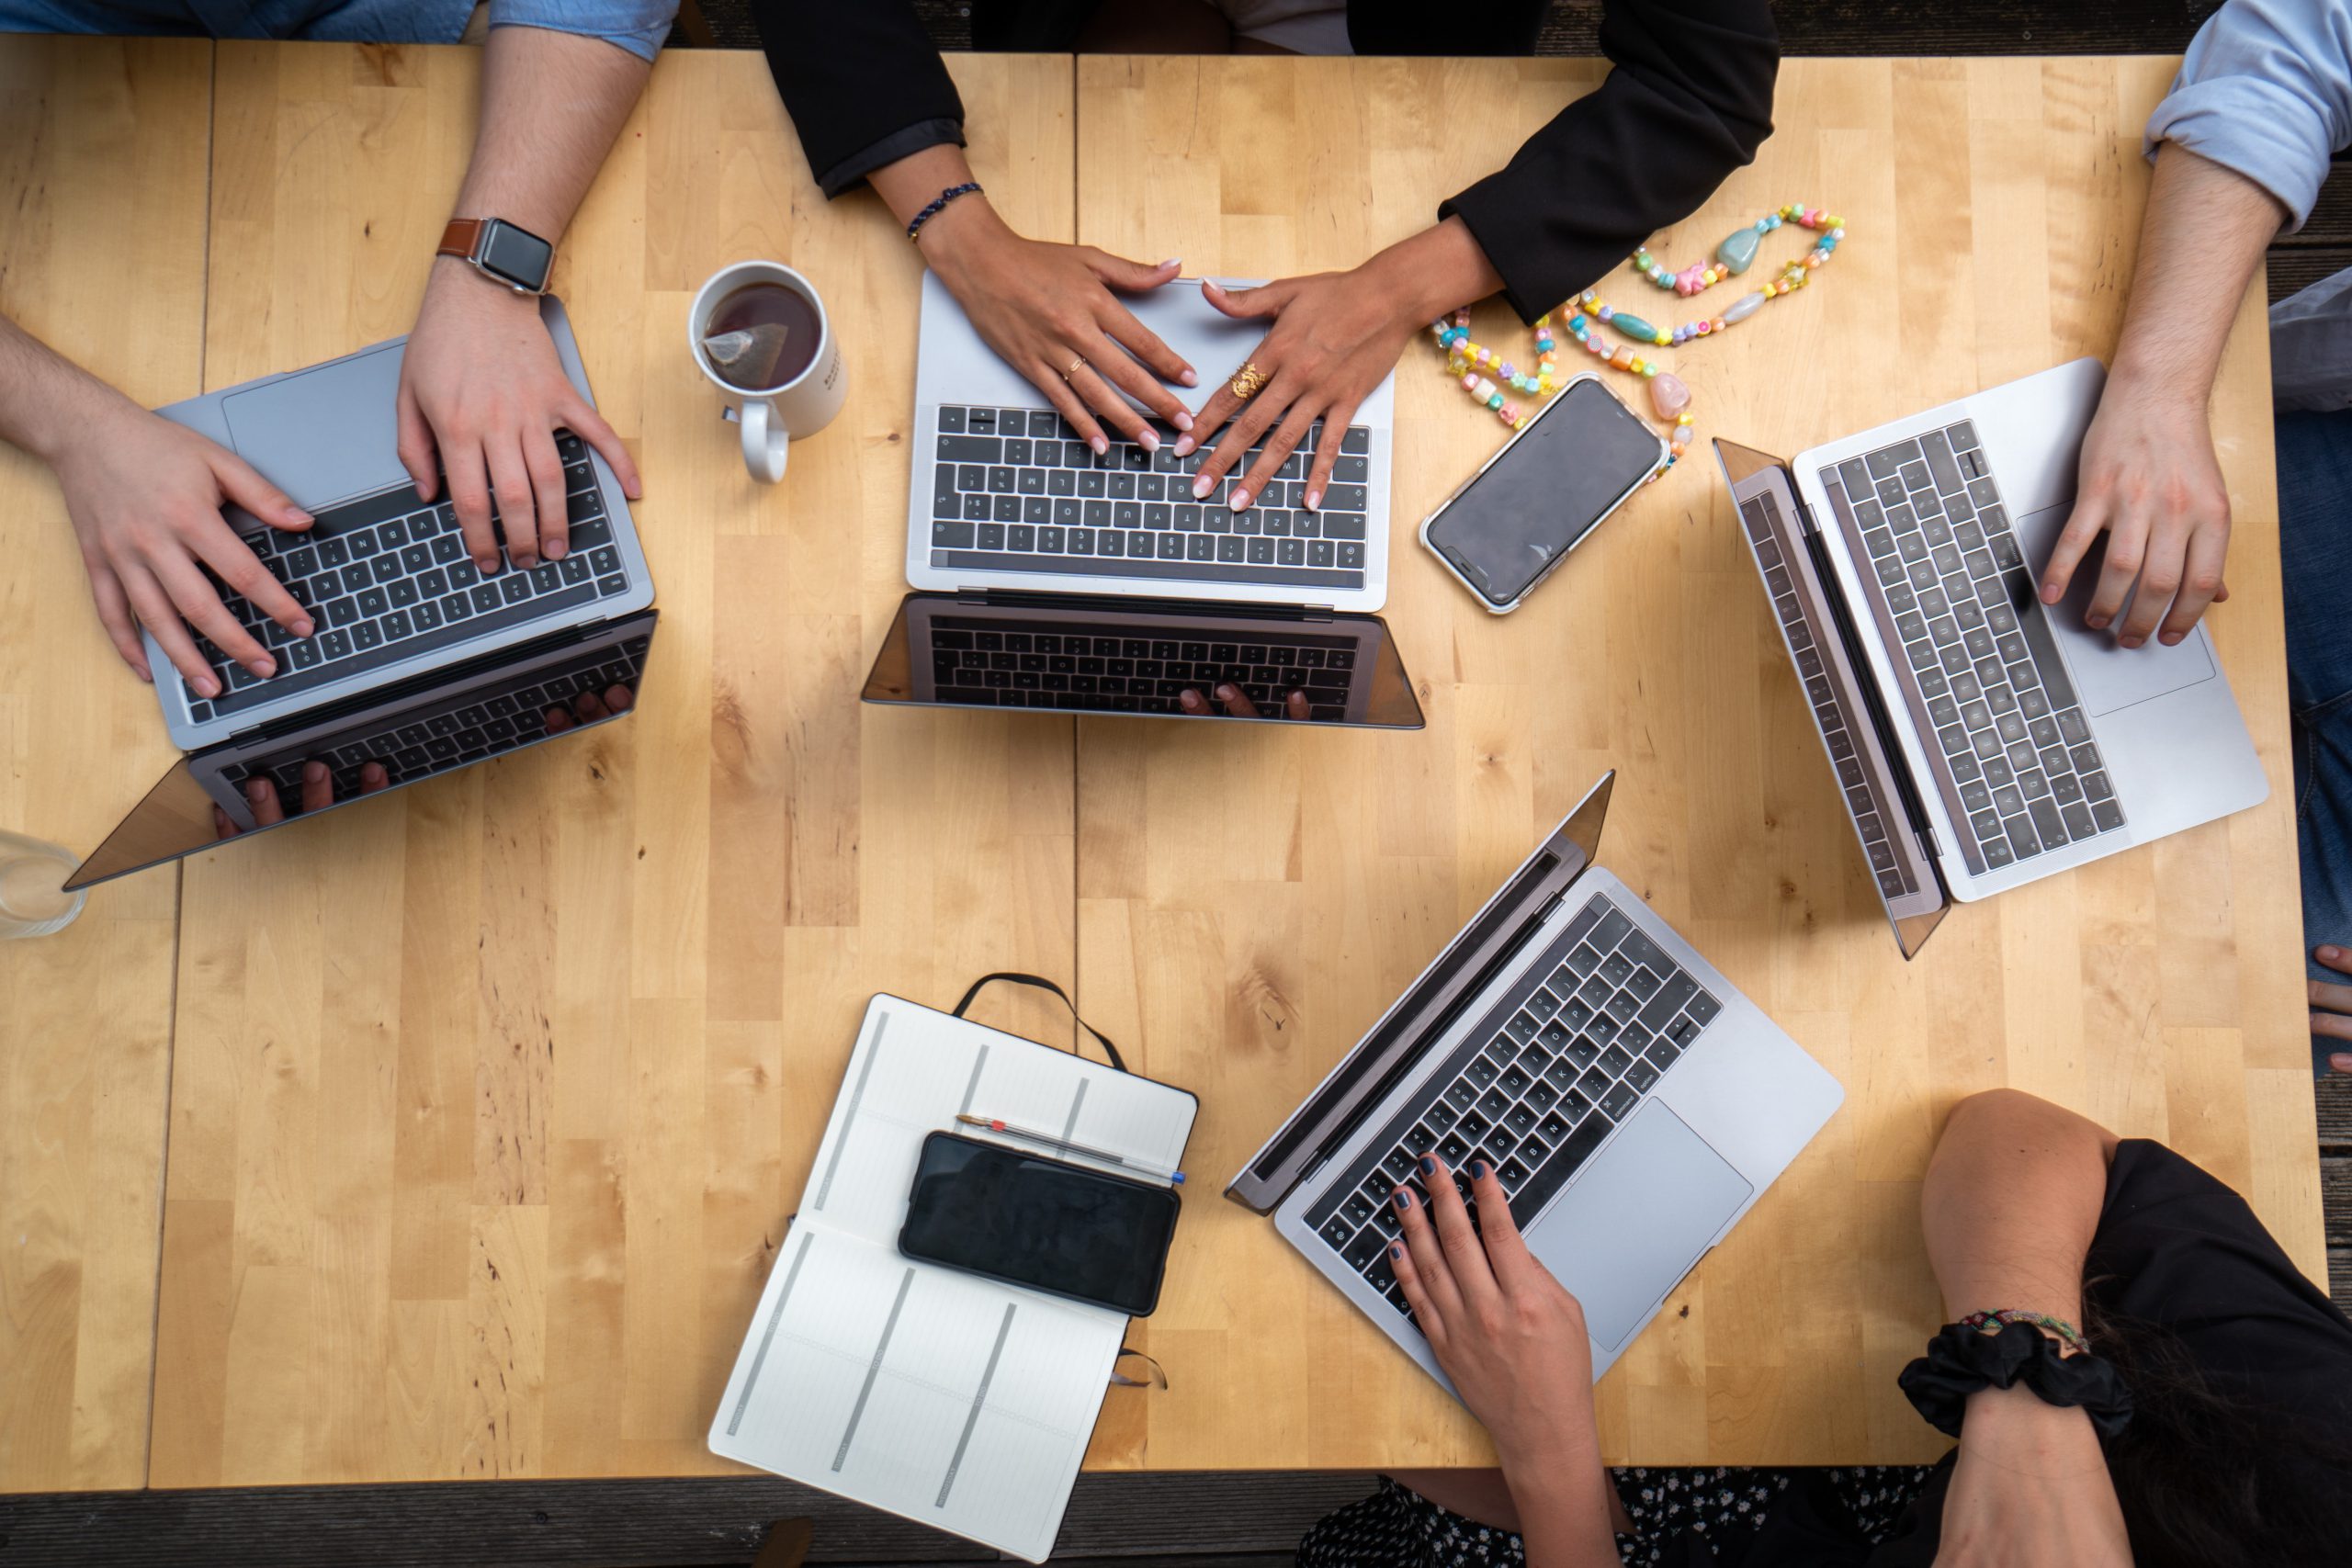 Aerial view of open work laptops and hands around a wooden table